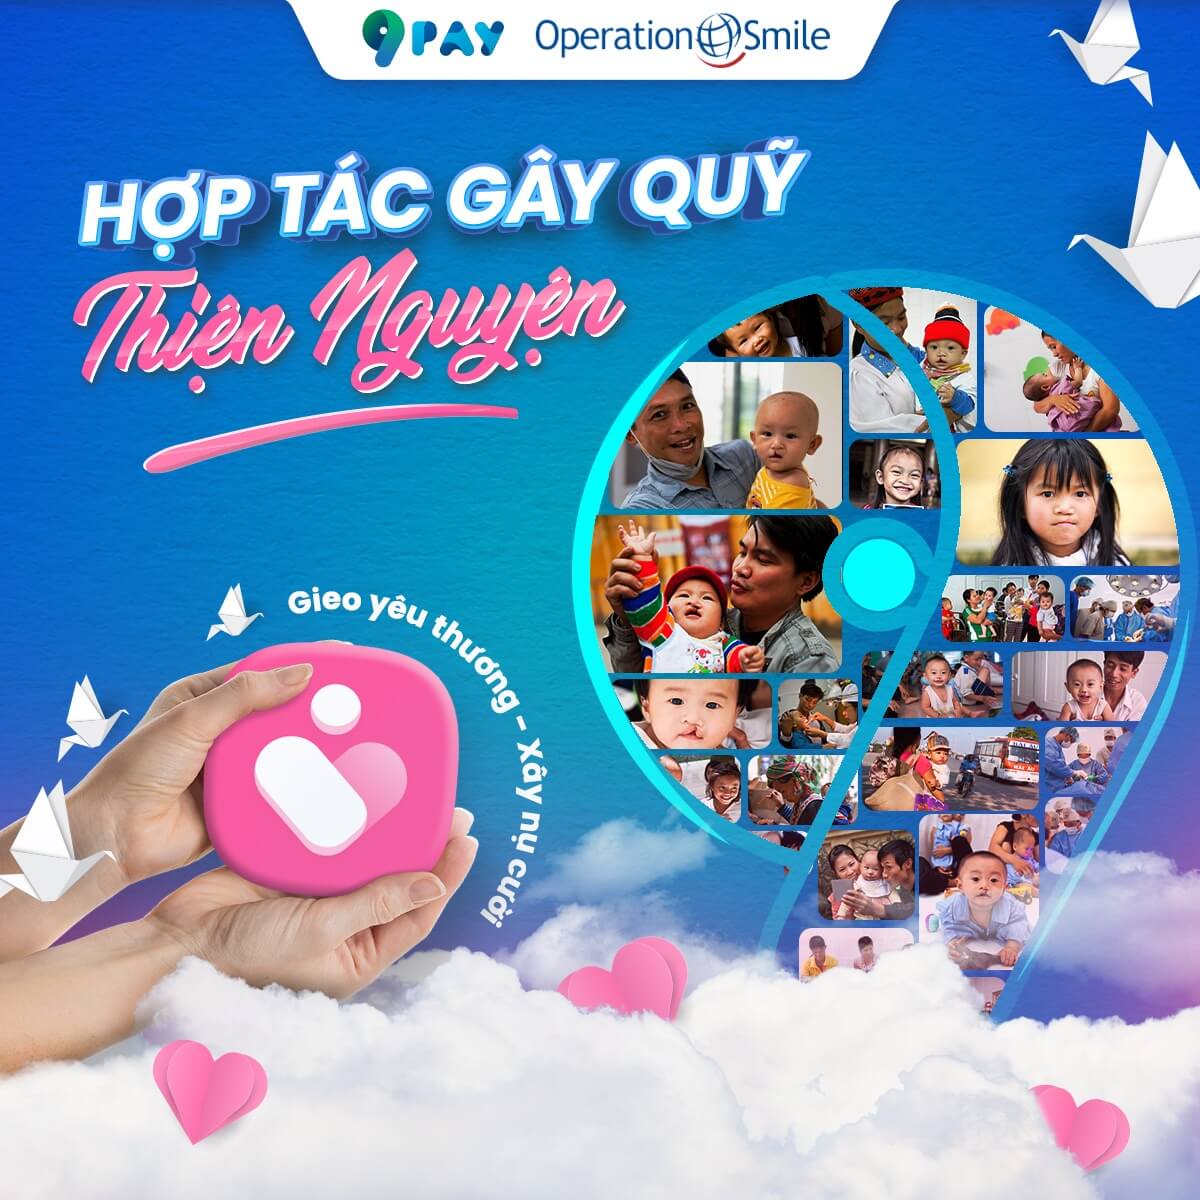 ZDY-9pay-dong-hanh-cung-quy-operation-smile-trong-hanh-trinh-gieo-yeu-thuong-xay-nu-cuoi